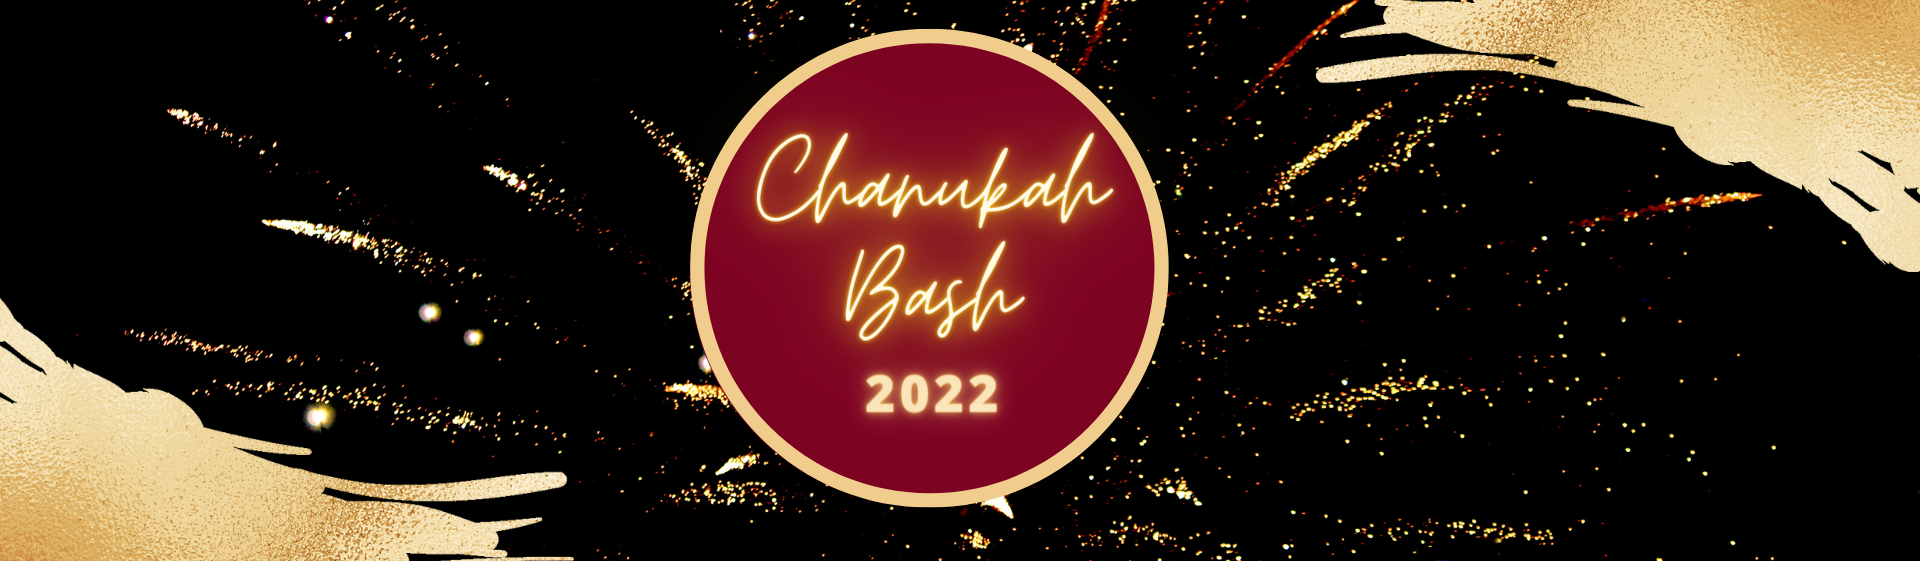 A black and gold image with a red circle in the middle that reads Chanukah Bash 2022